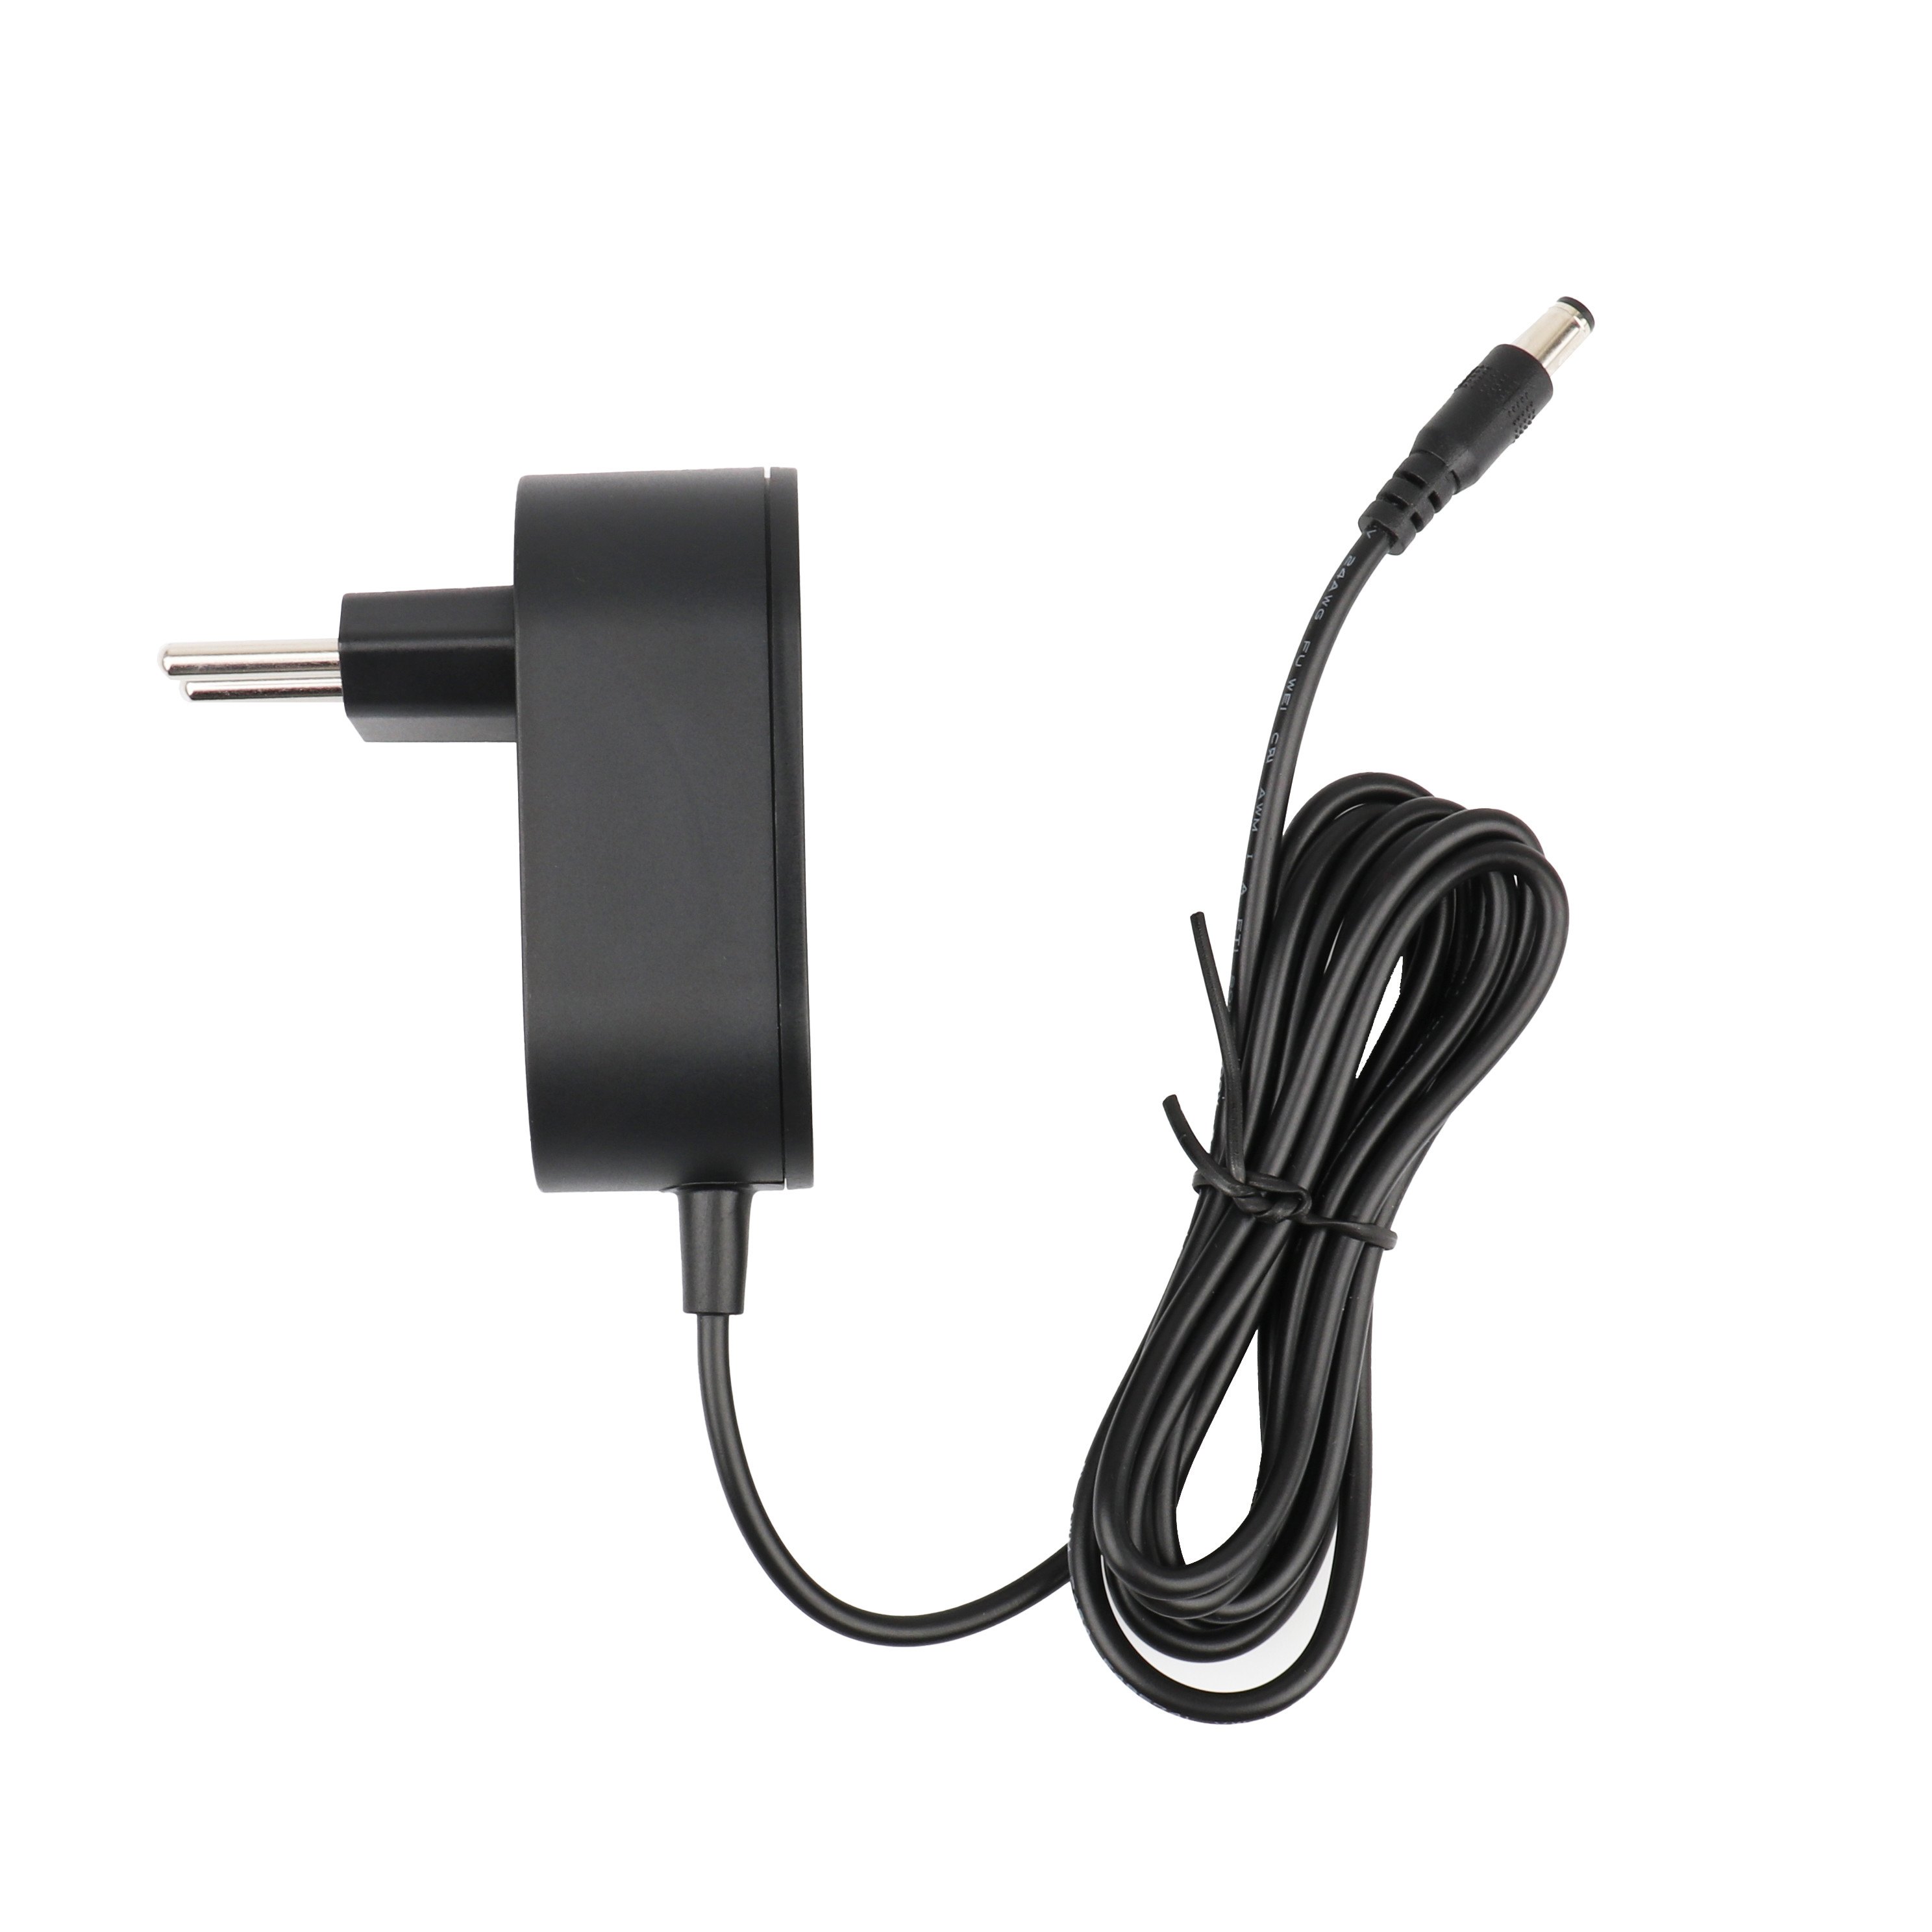 China Wall Mount 1300mA 9V DC Power Adapter With ICBr EN60335-2-29 on sale